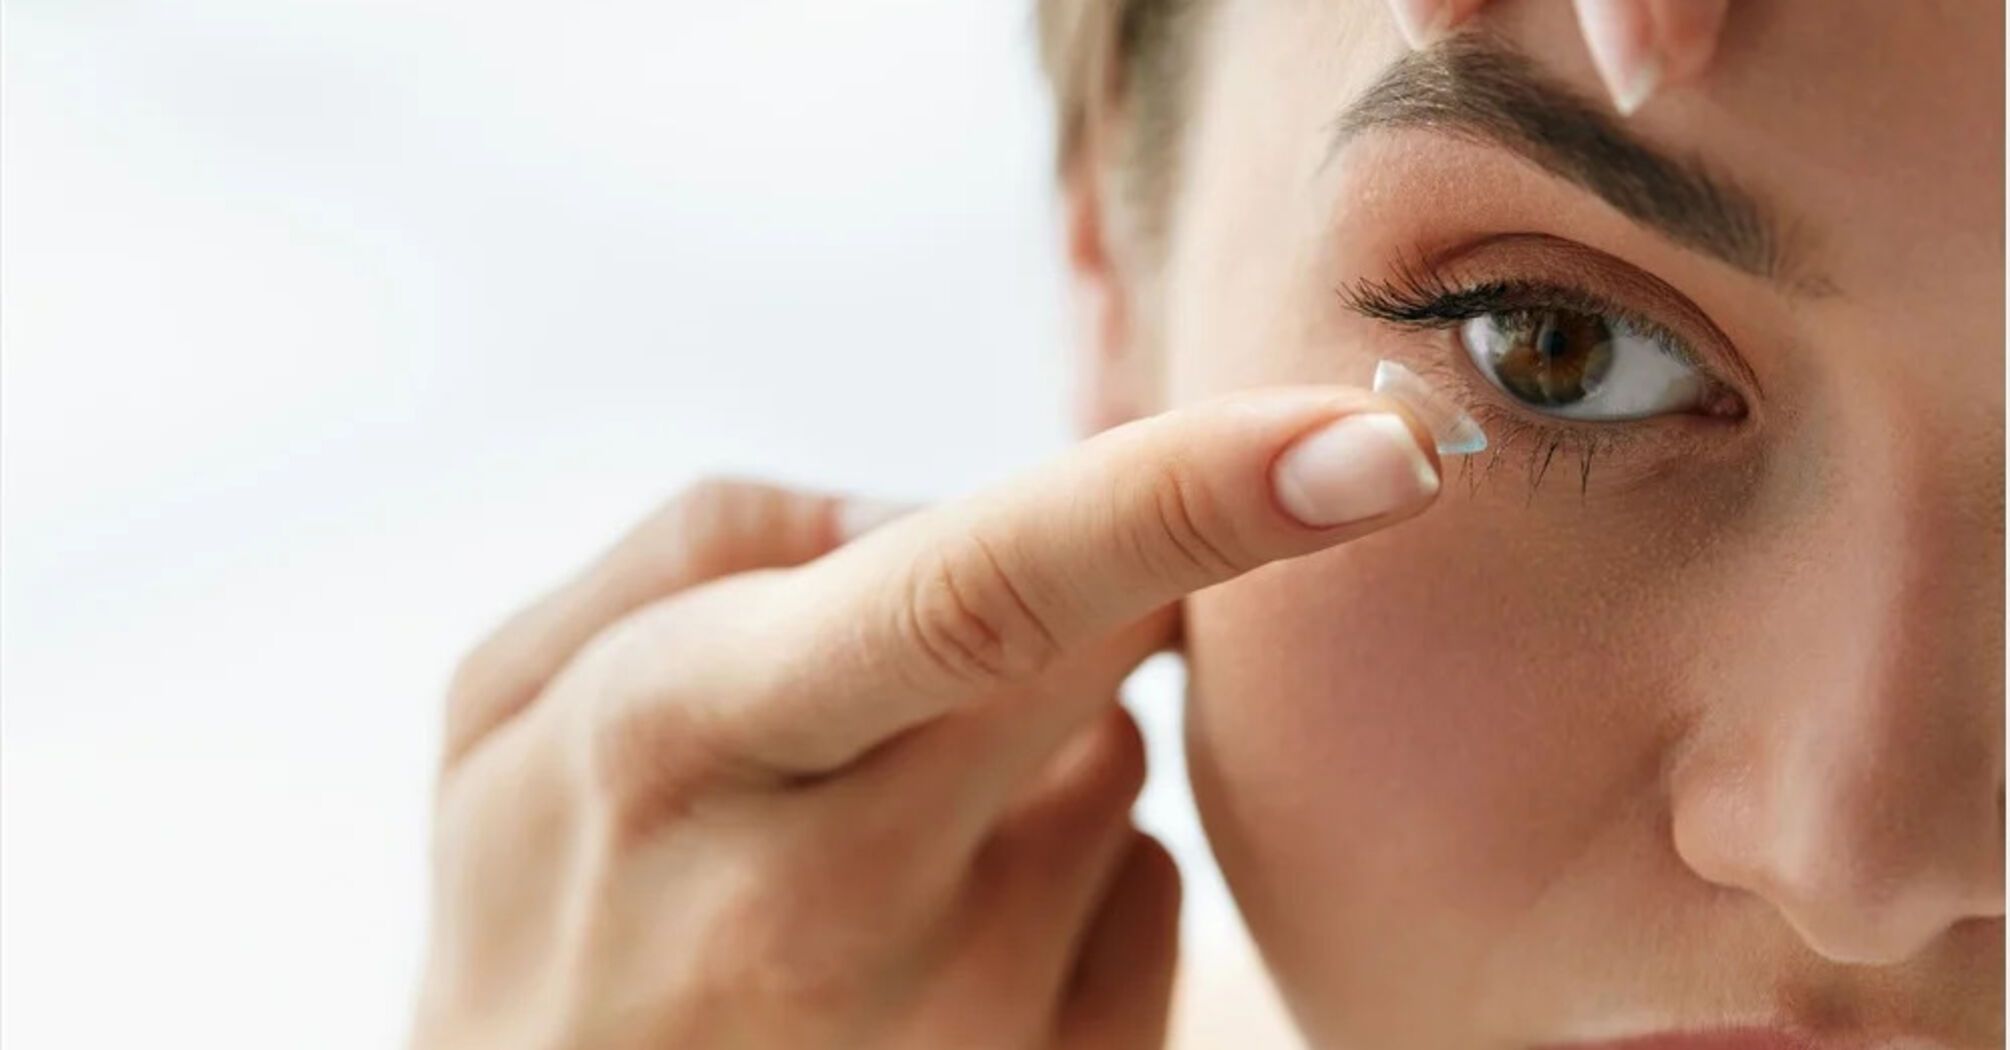 What you need to know about contact lenses